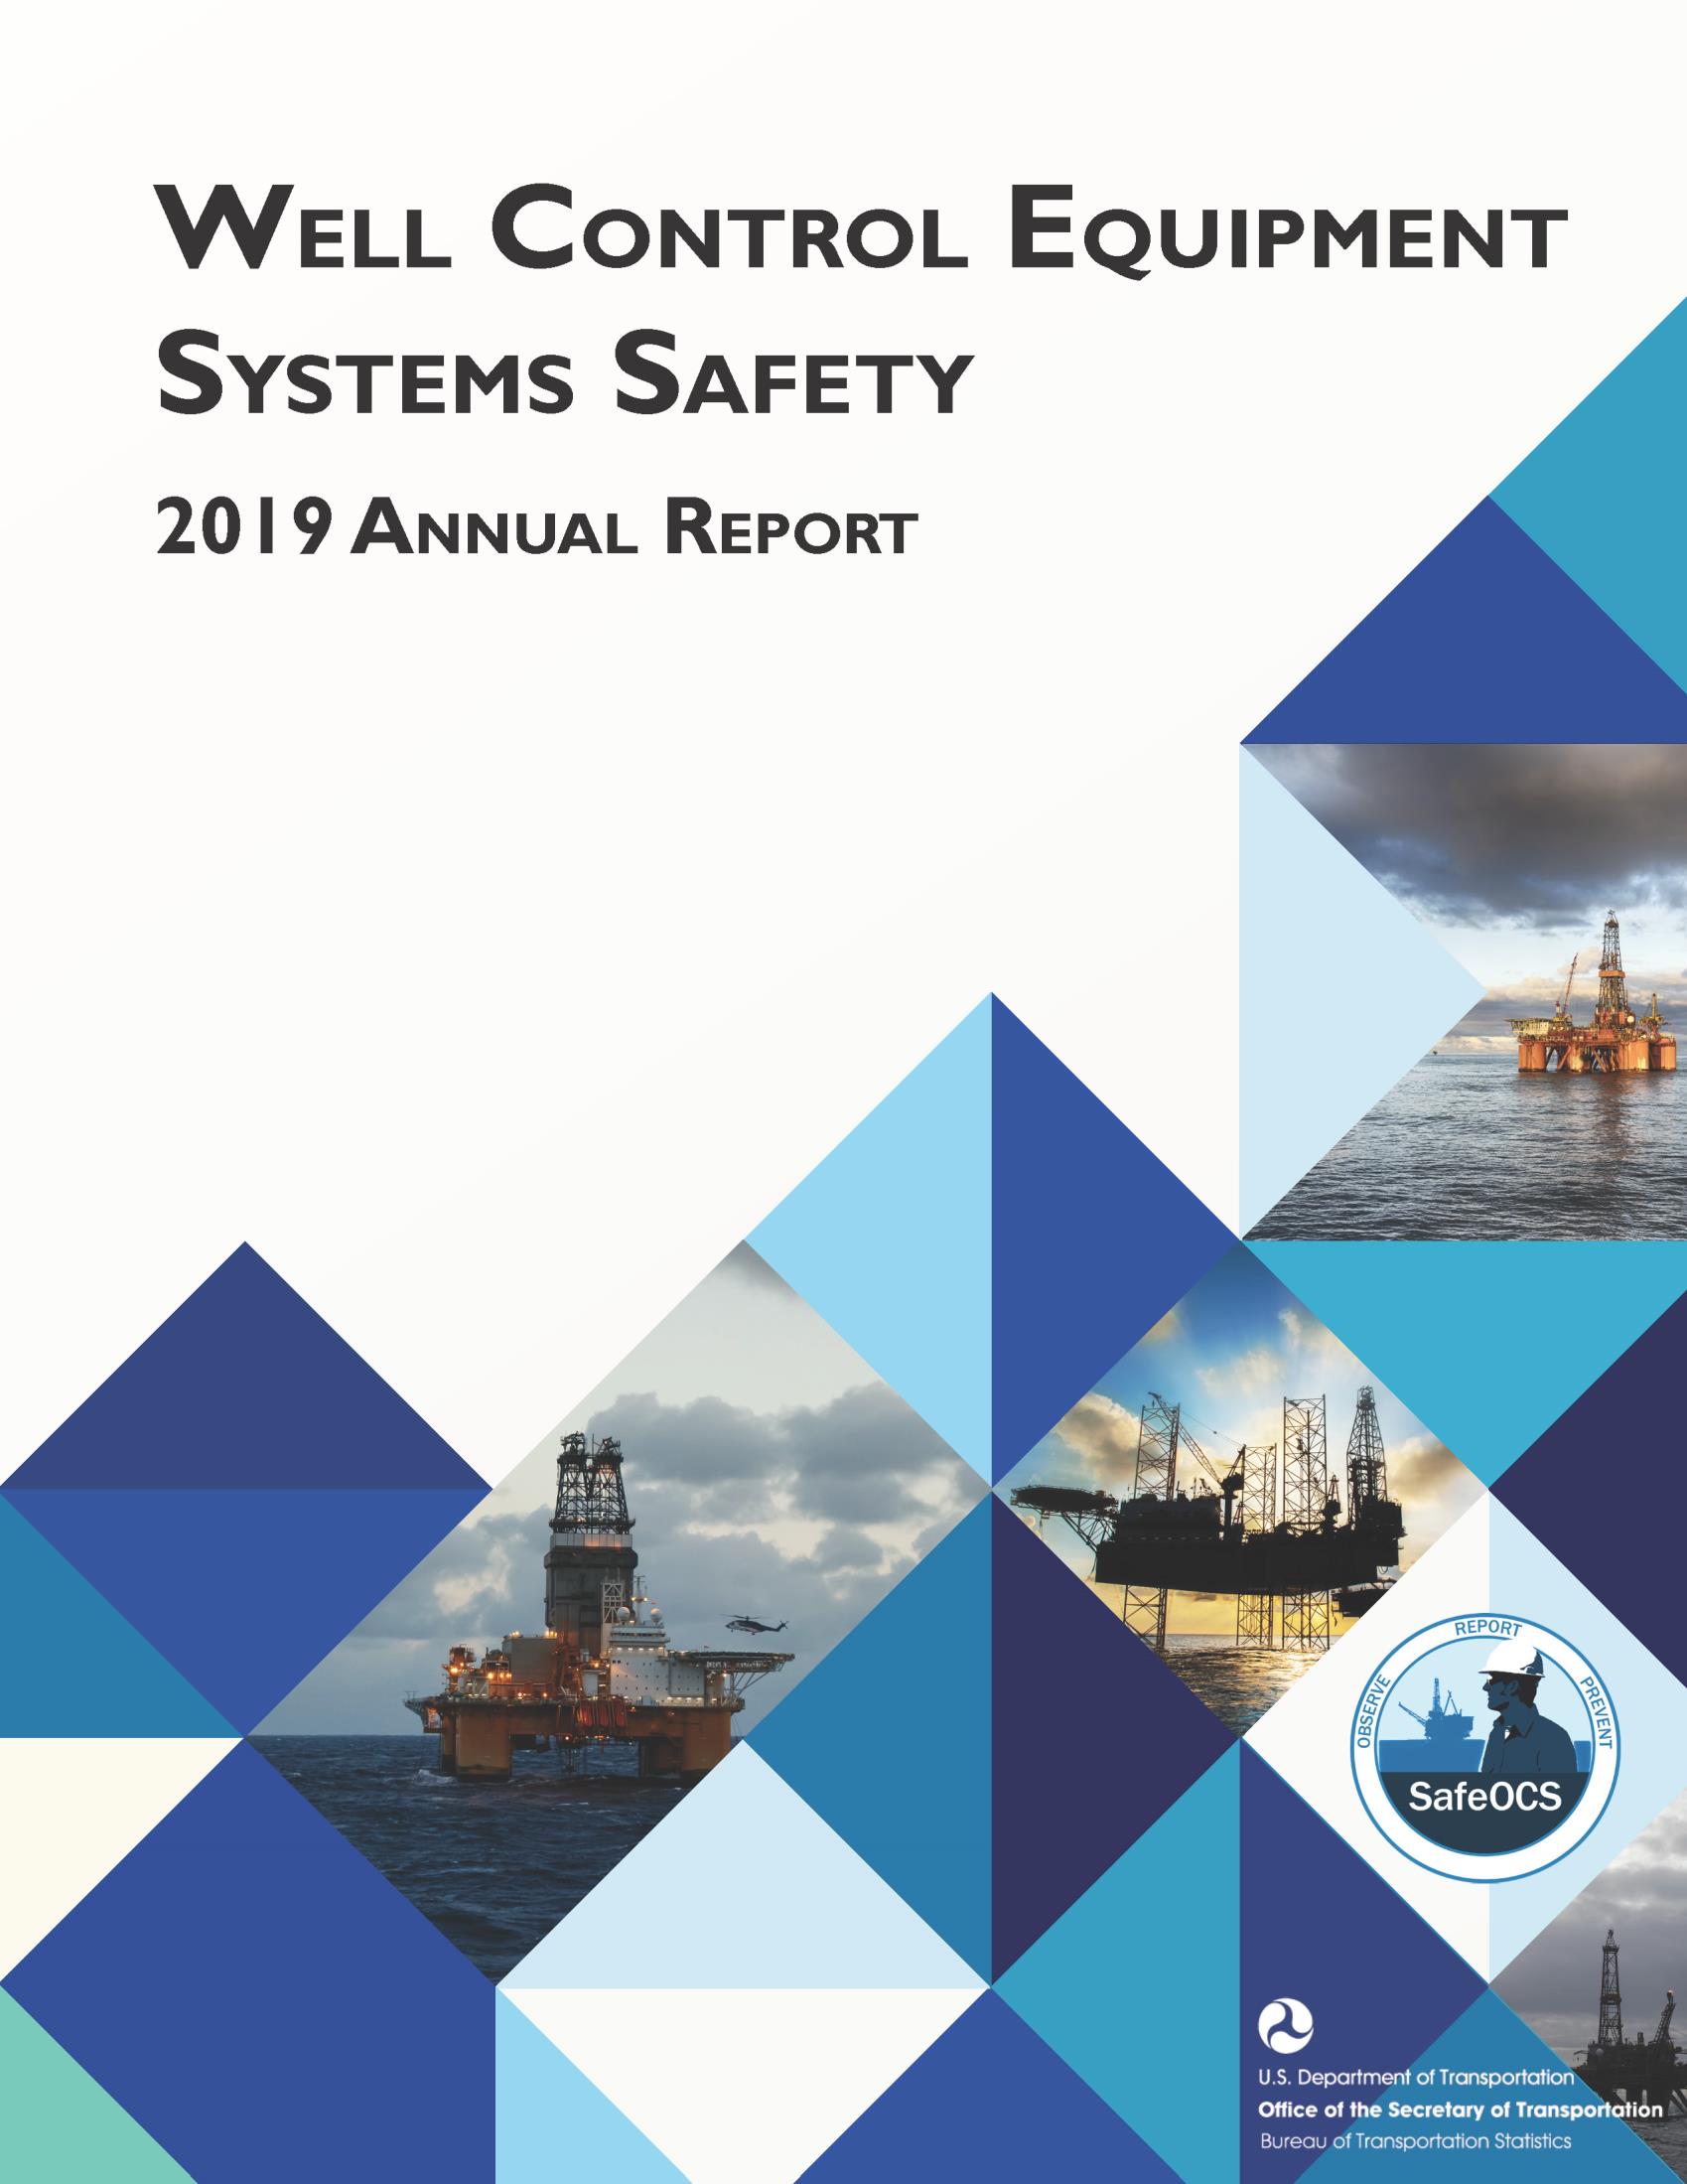 2019 SafeOCS WCE annual report download link